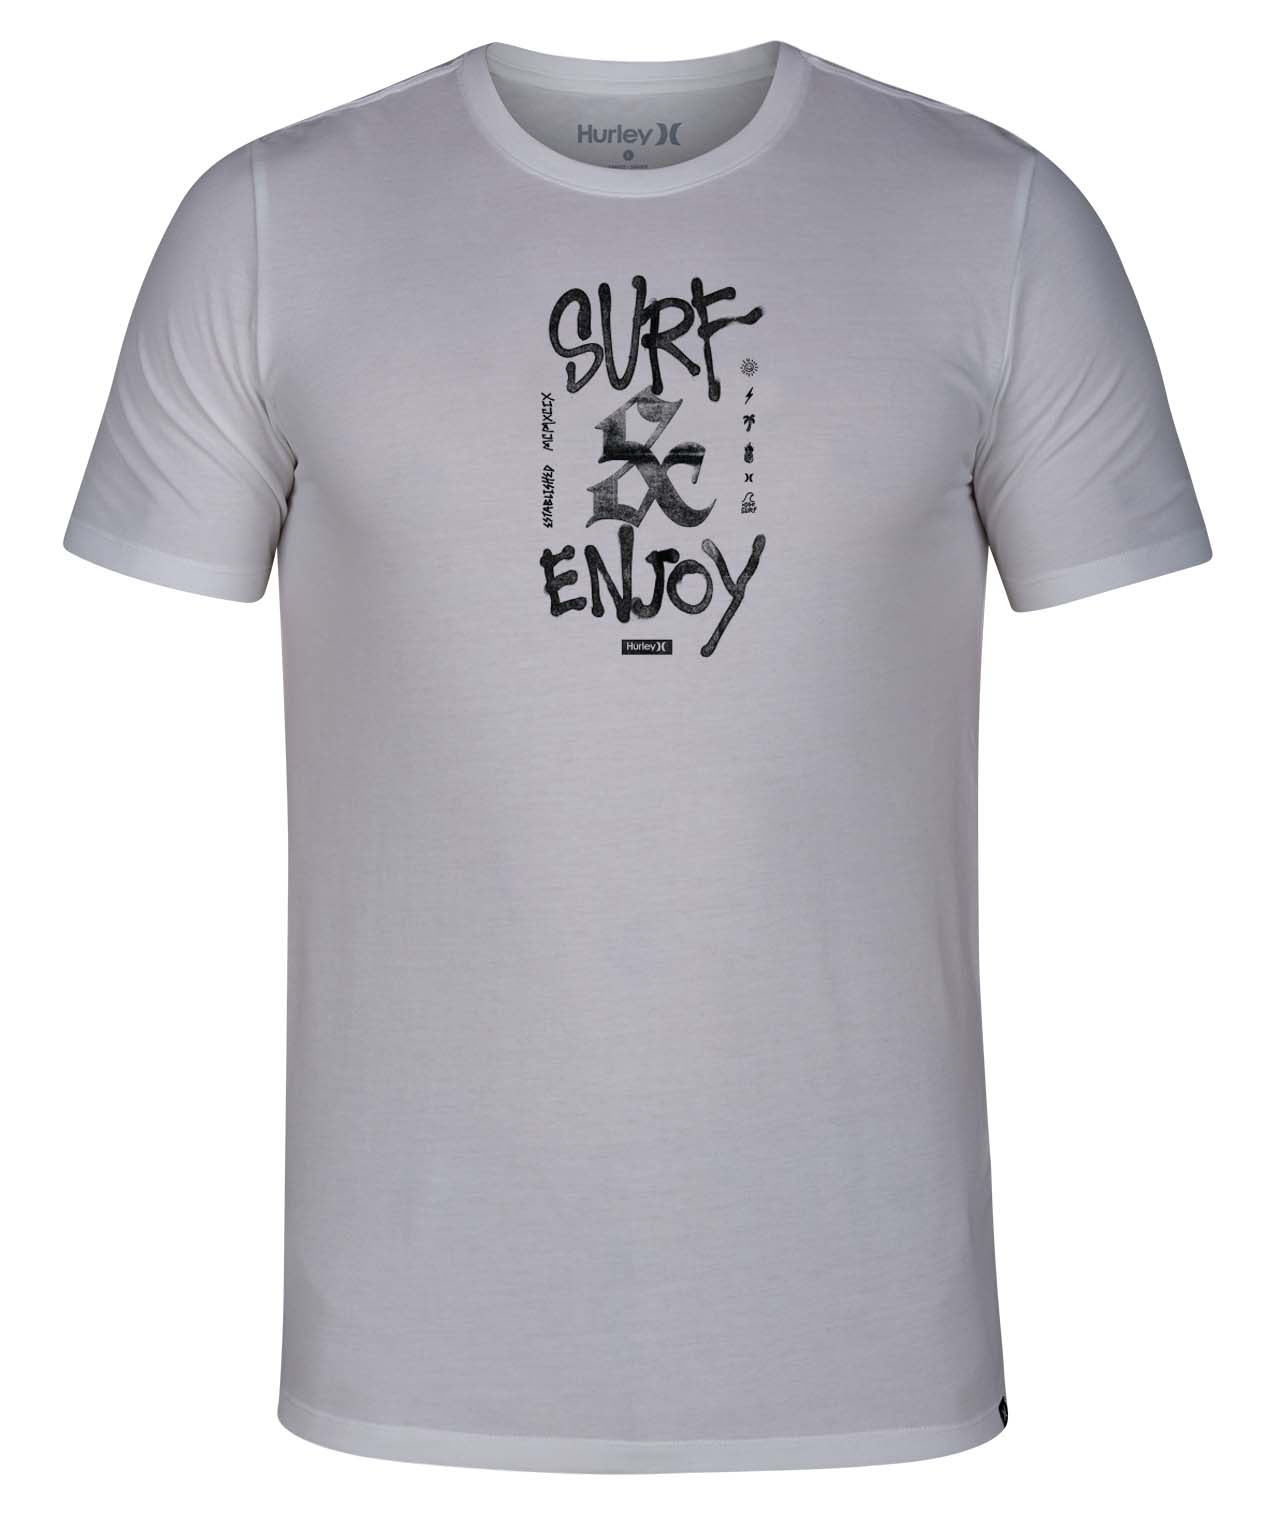 HURLEY M DRI-FIT SURF AND ENJOY TEE AT2937 100